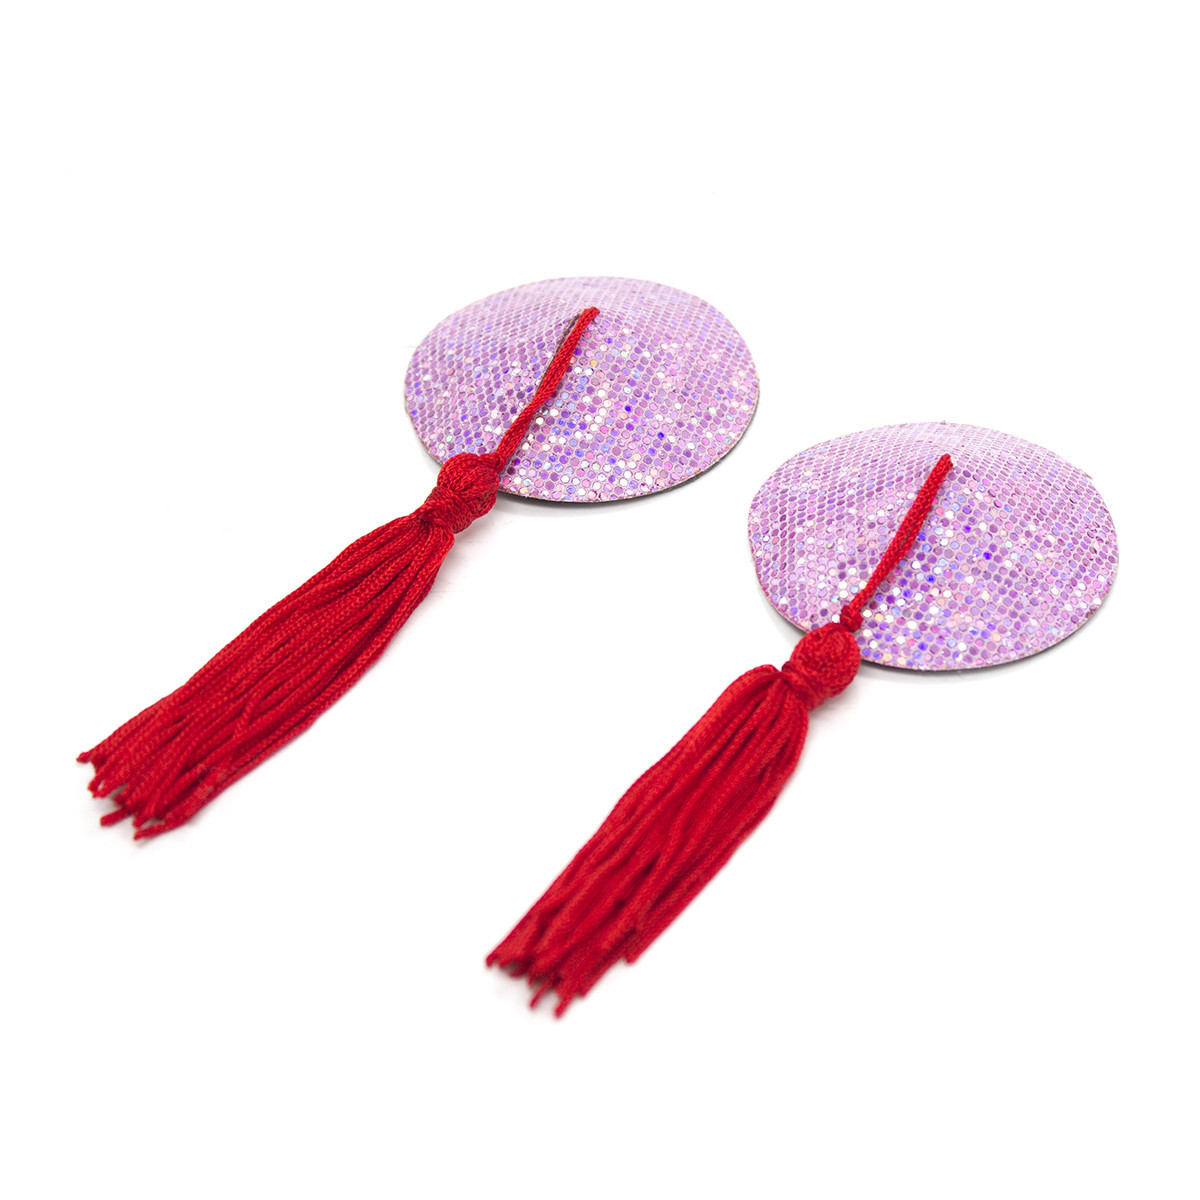 201101004--Round SM nipple patch sequined silicone nipple patch adhesive patch